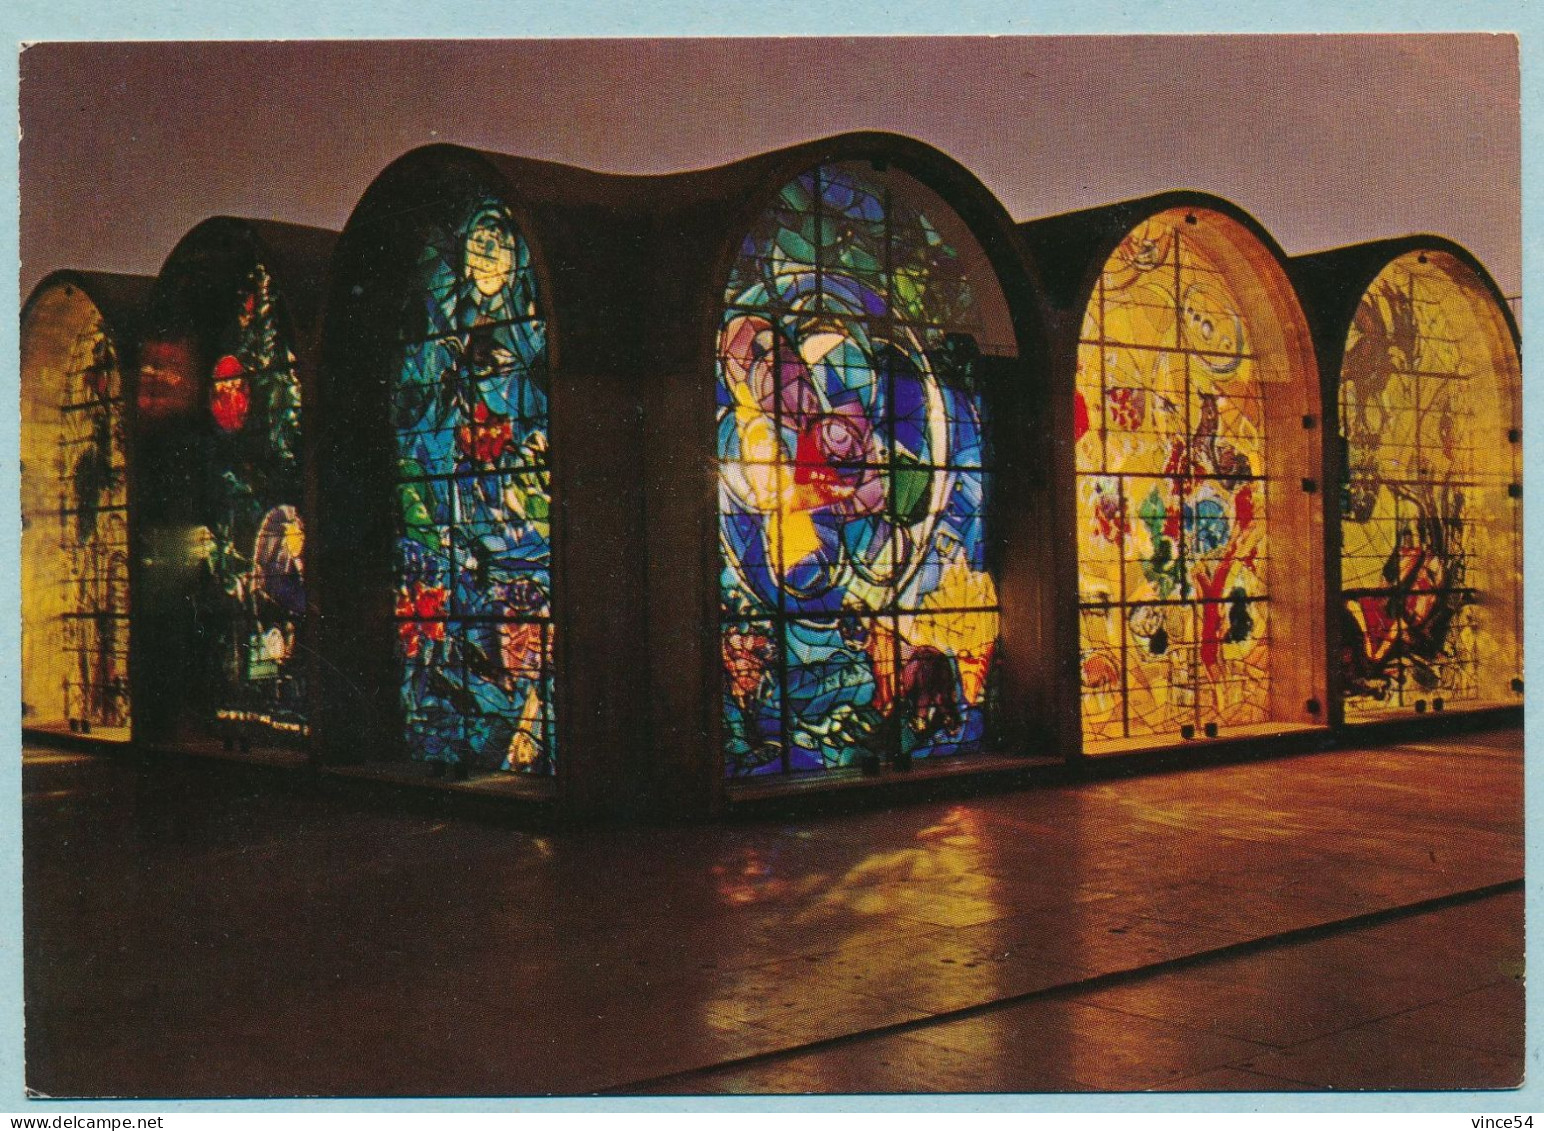 The Tribes Of Israel - Stained Glass Windows By Marc Chagall At The Hadassah Hebrew University Medical Centre Synagogue - Israel